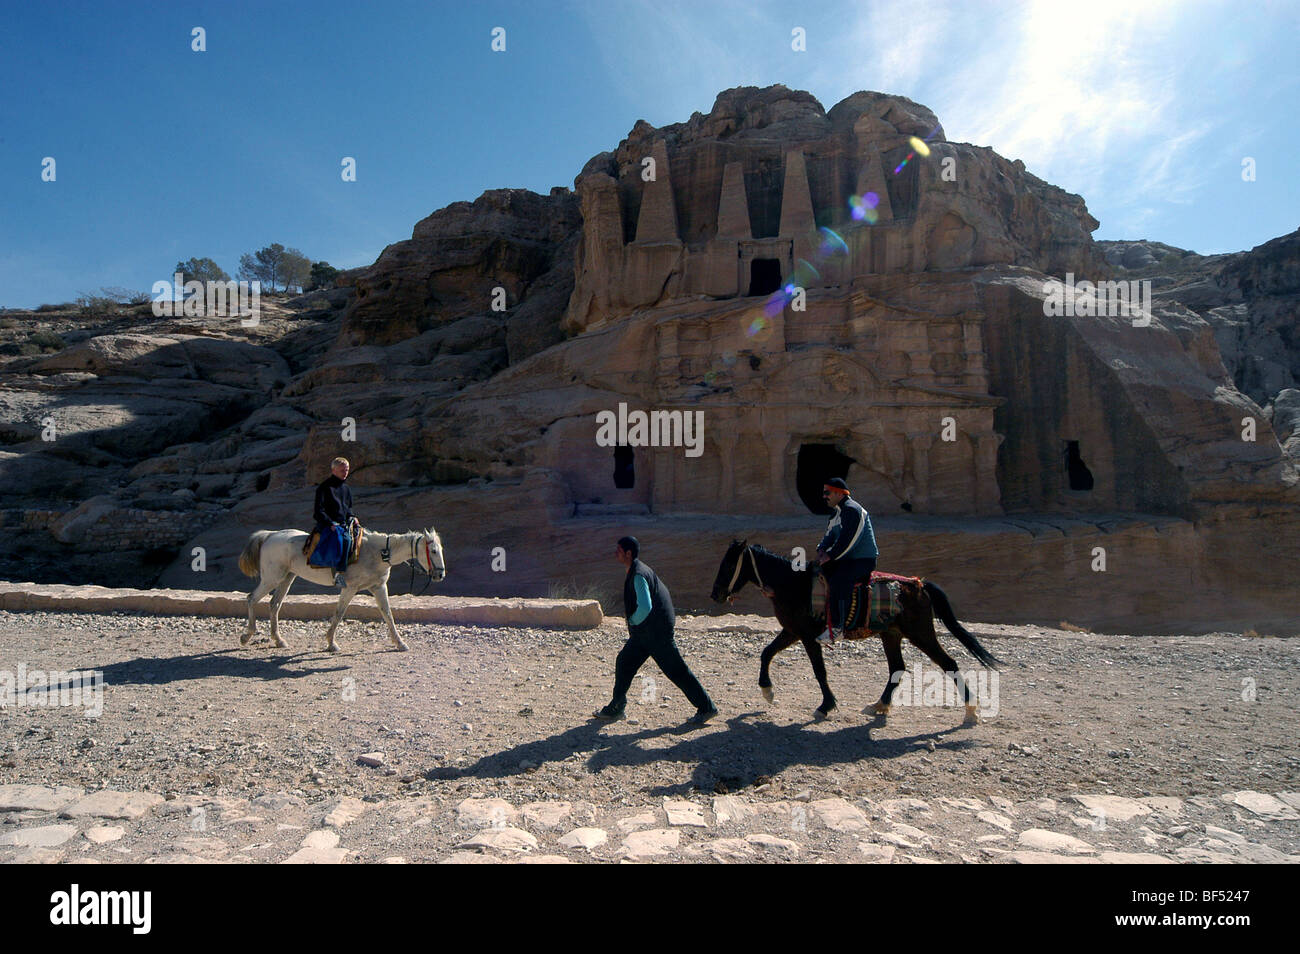 Horses and riders pass the Obelisk tomb at the entrance to Petra, Jordan Stock Photo